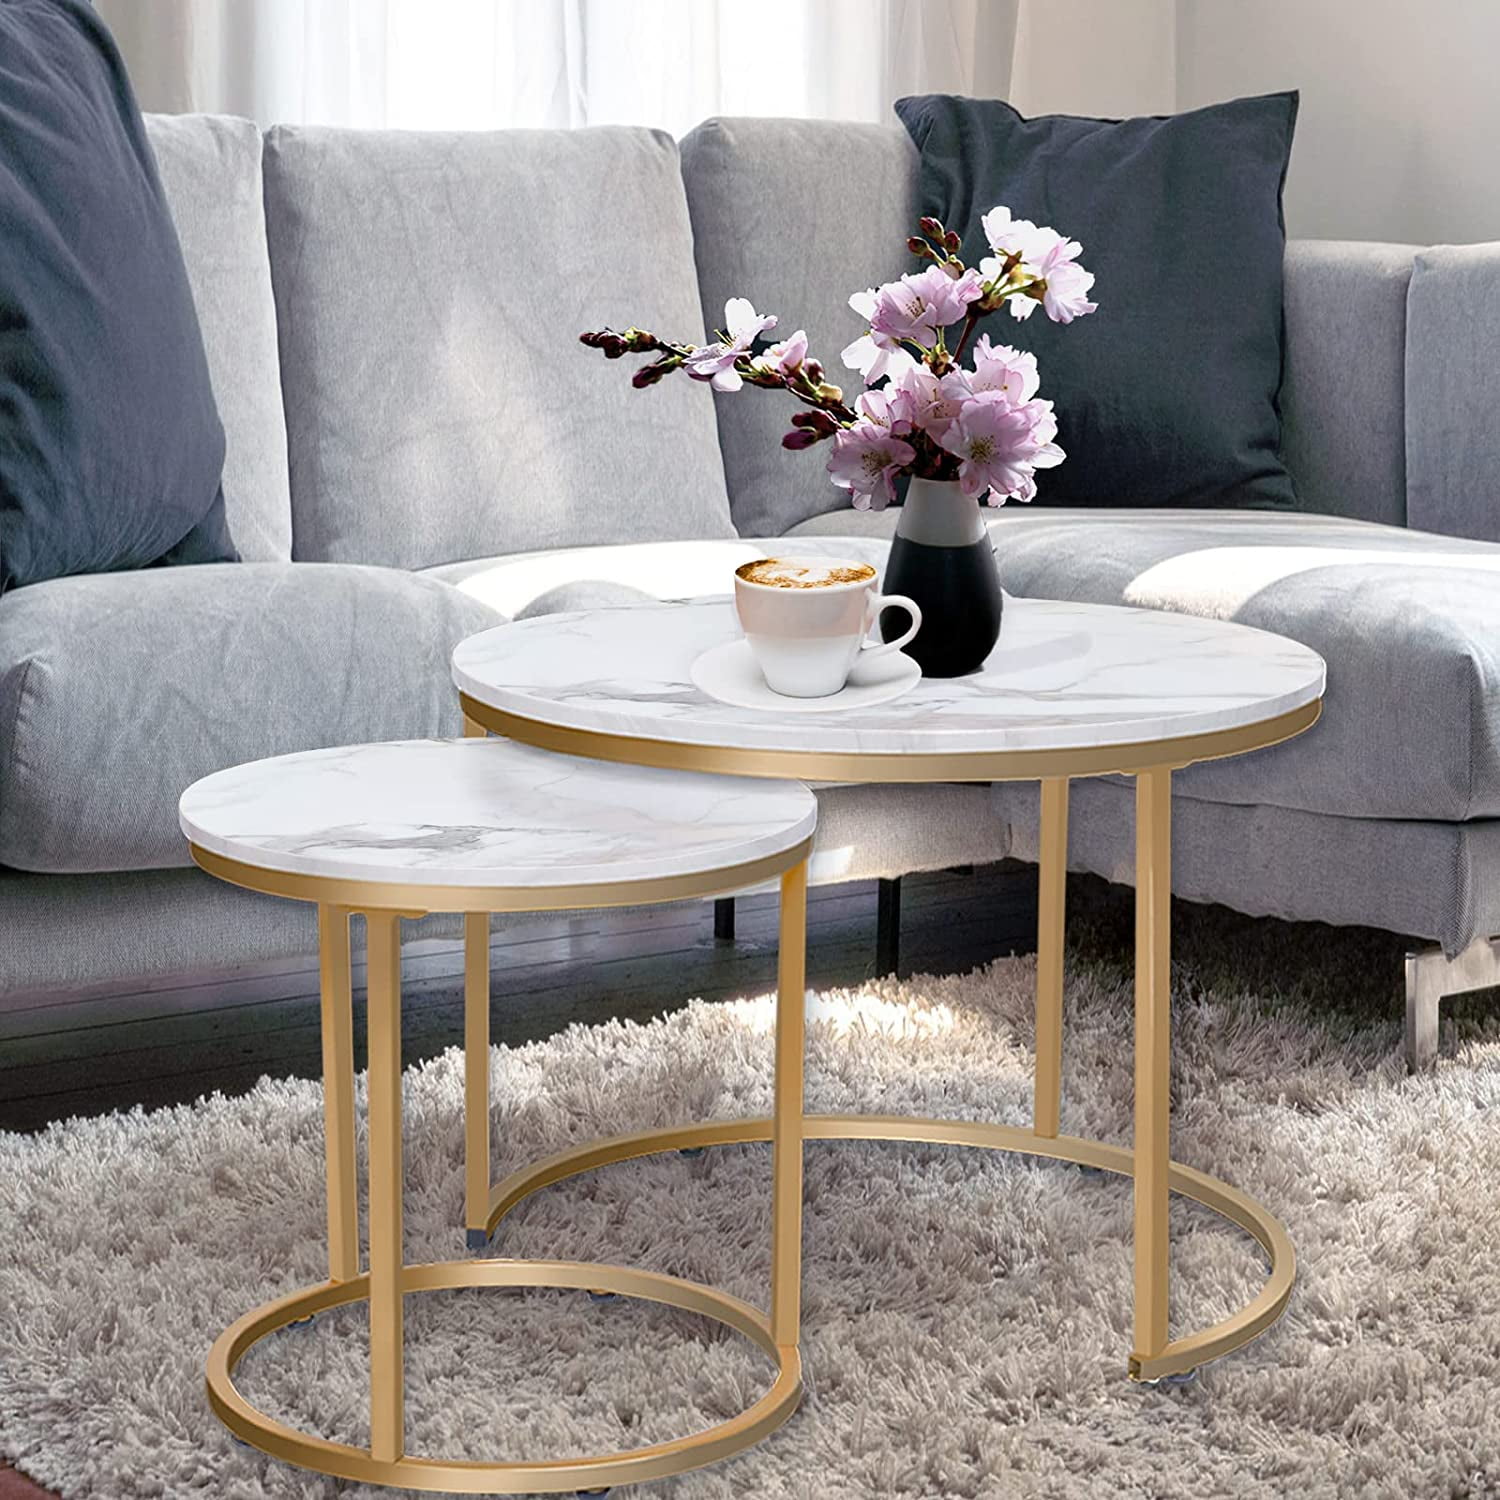 aboxoo Coffee Table Nesting White Set of 2 Side Set Golden Frame Circular  and Marble Pattern Wooden Tables, Living Room Bedroom Apartment Modern 